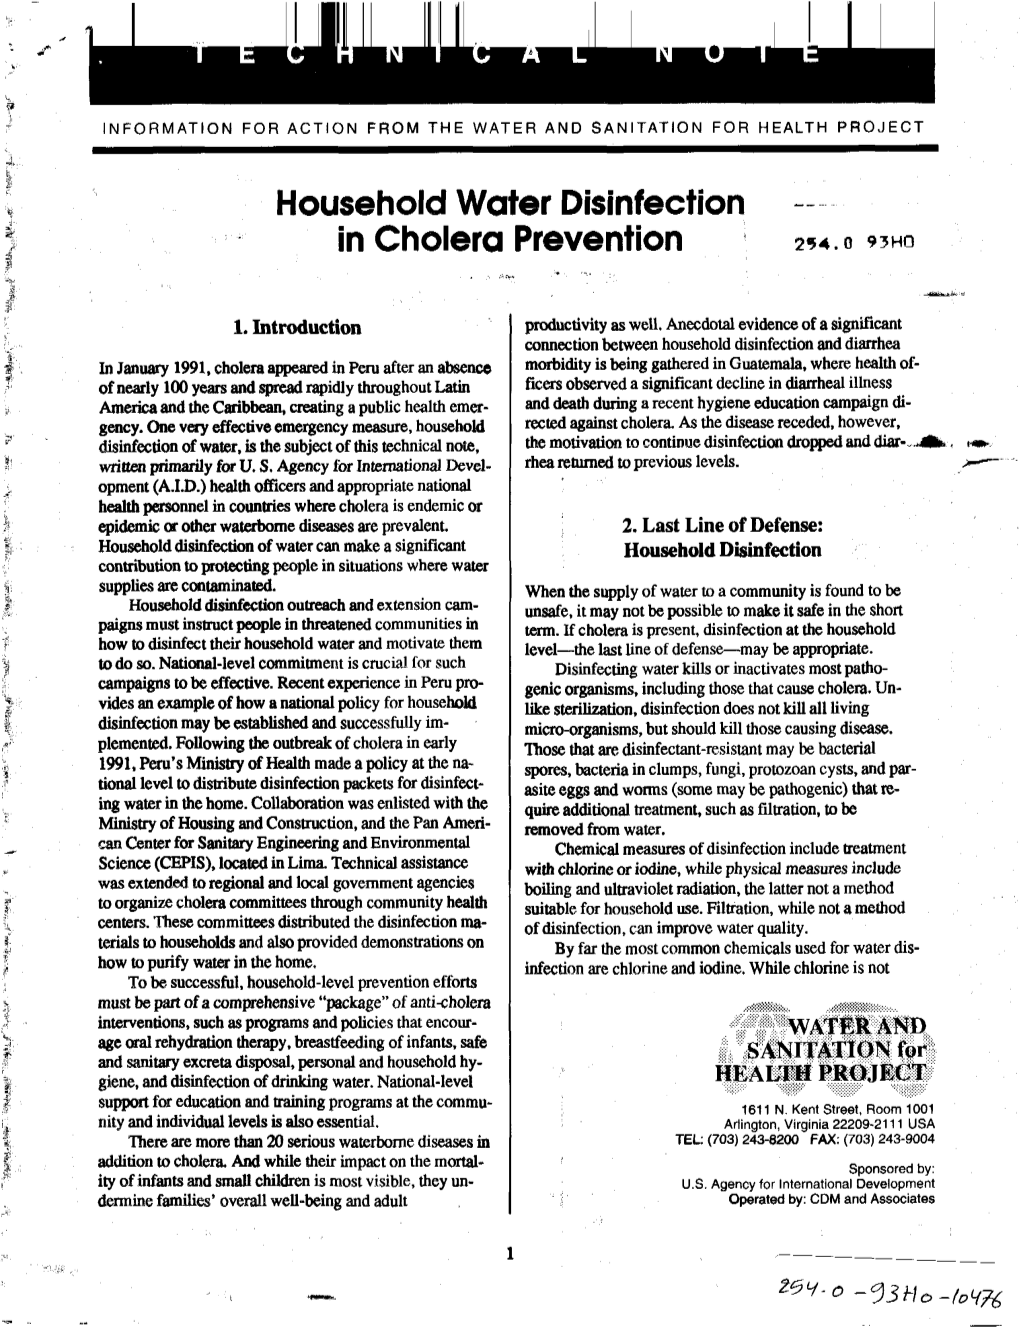 Household Water Disinfection in Cholera Prevention 254.0 93HO